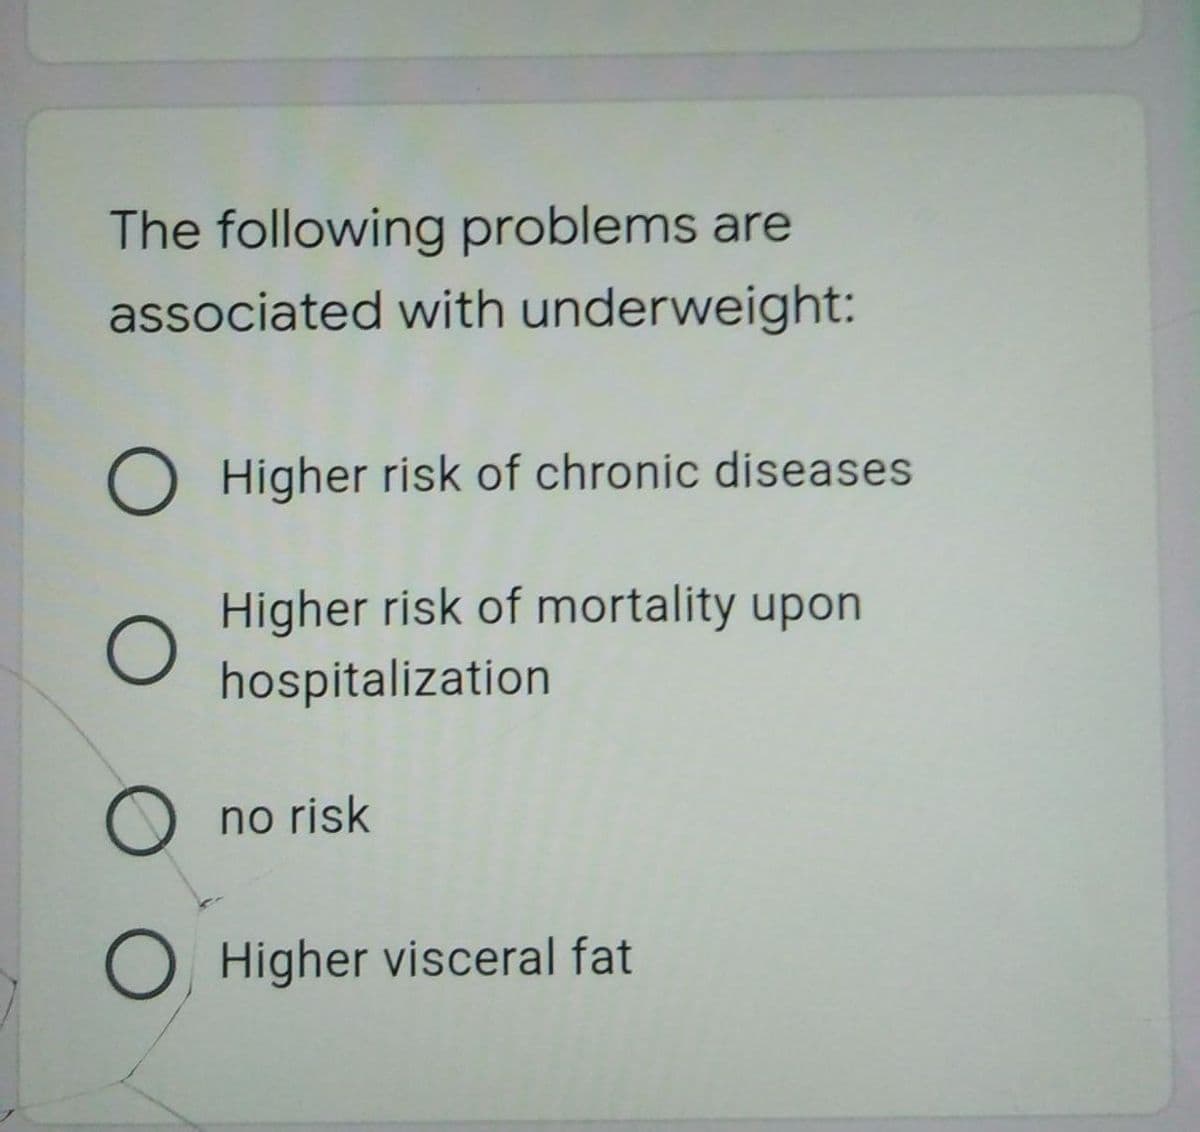 The following problems are
associated with underweight:
Higher risk of chronic diseases
Higher risk of mortality upon
hospitalization
O no risk
OHigher visceral fat
